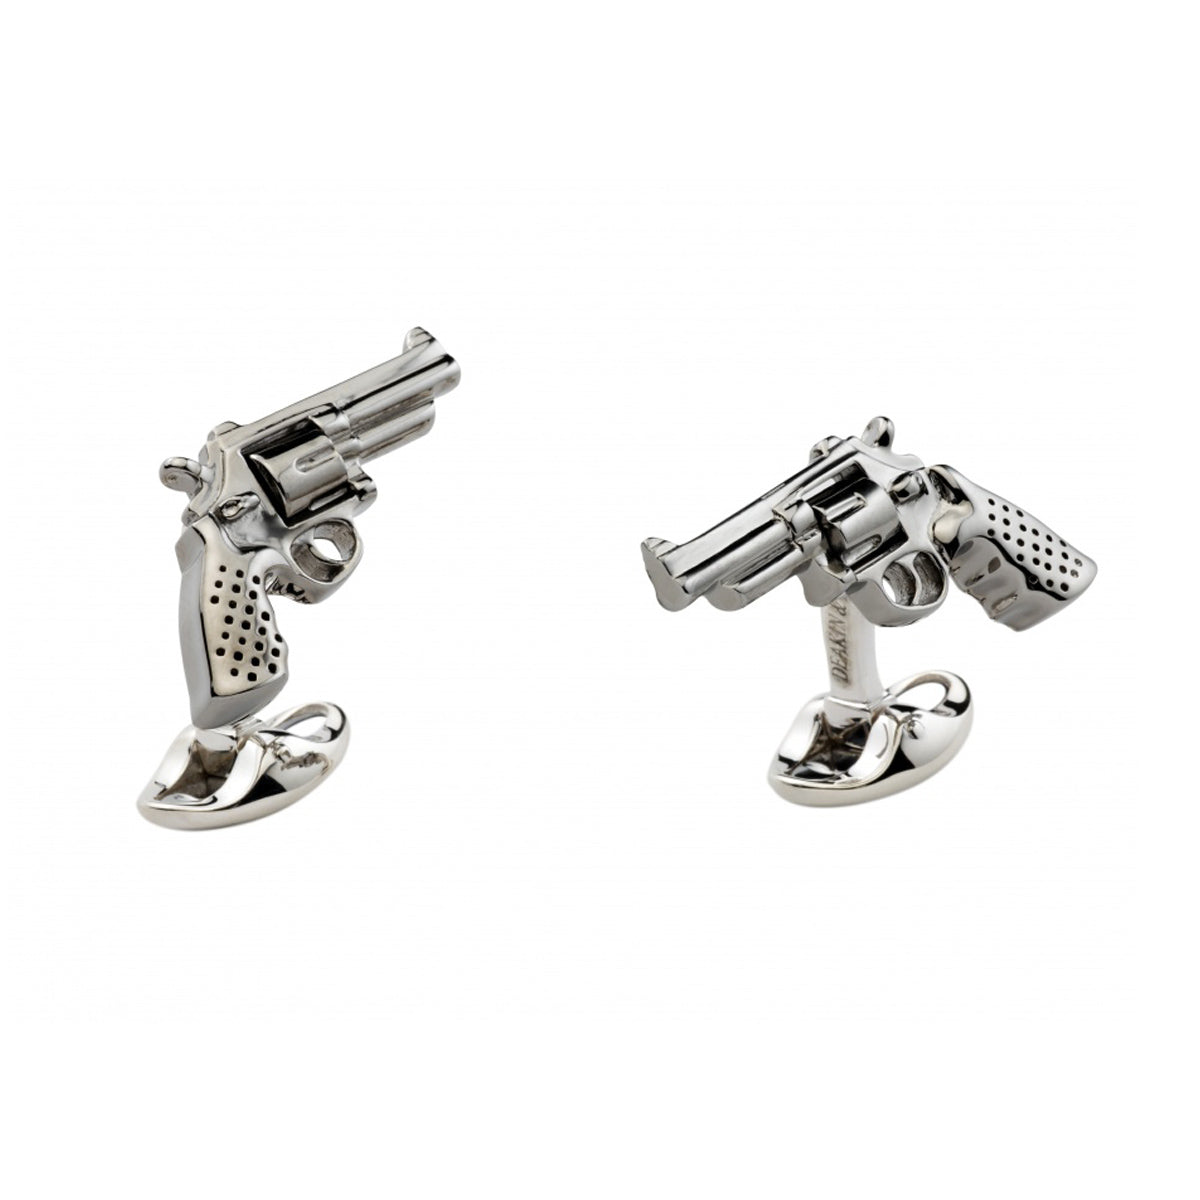 A pair of Revolver Gun Cufflinks with Spinning Cylinders